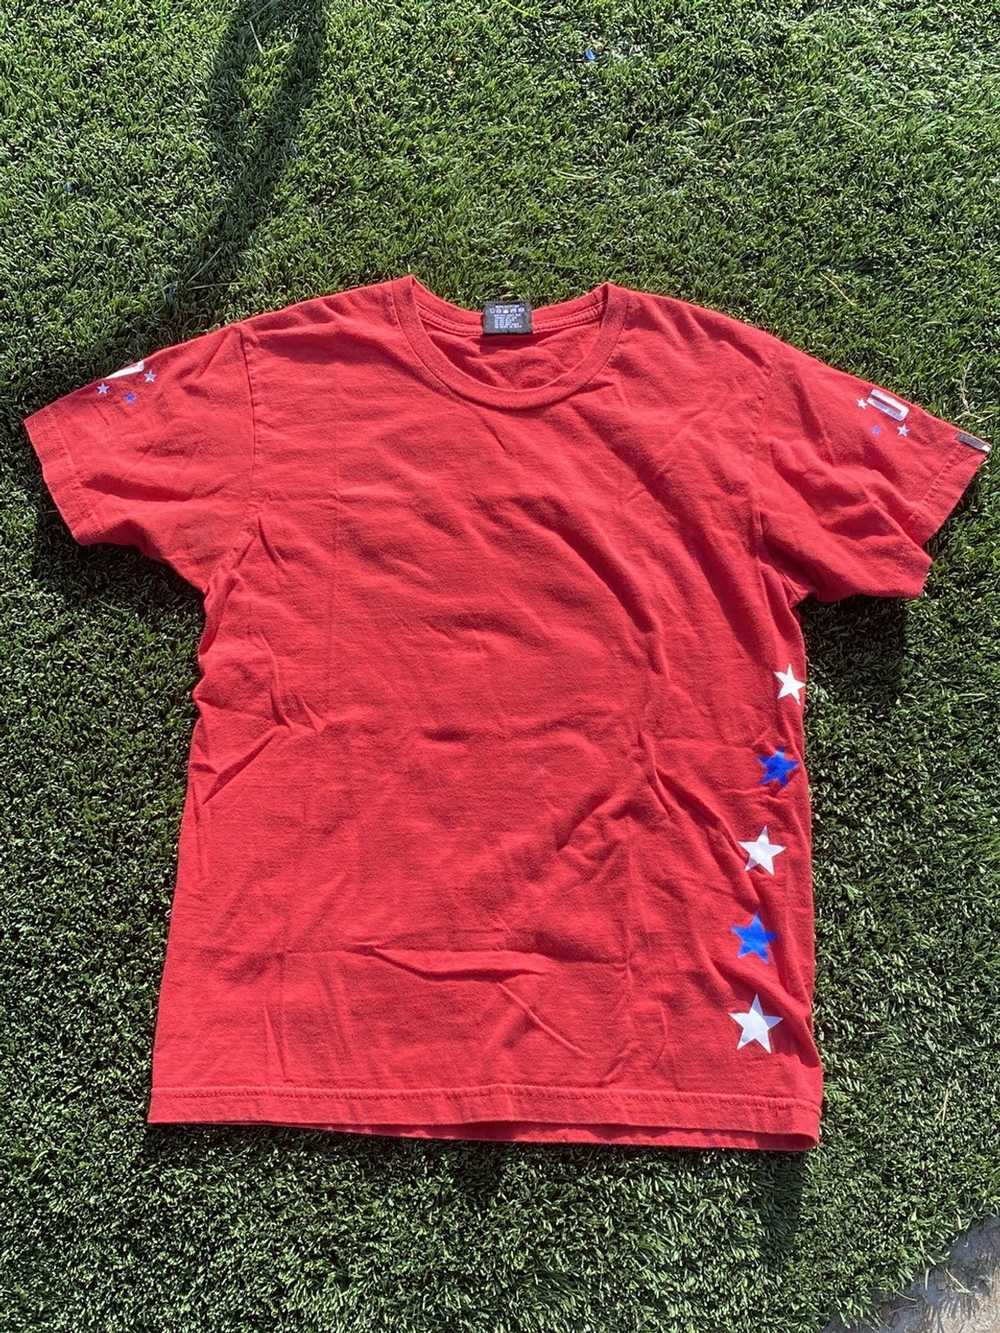 Undefeated Red undefeated tee - Gem